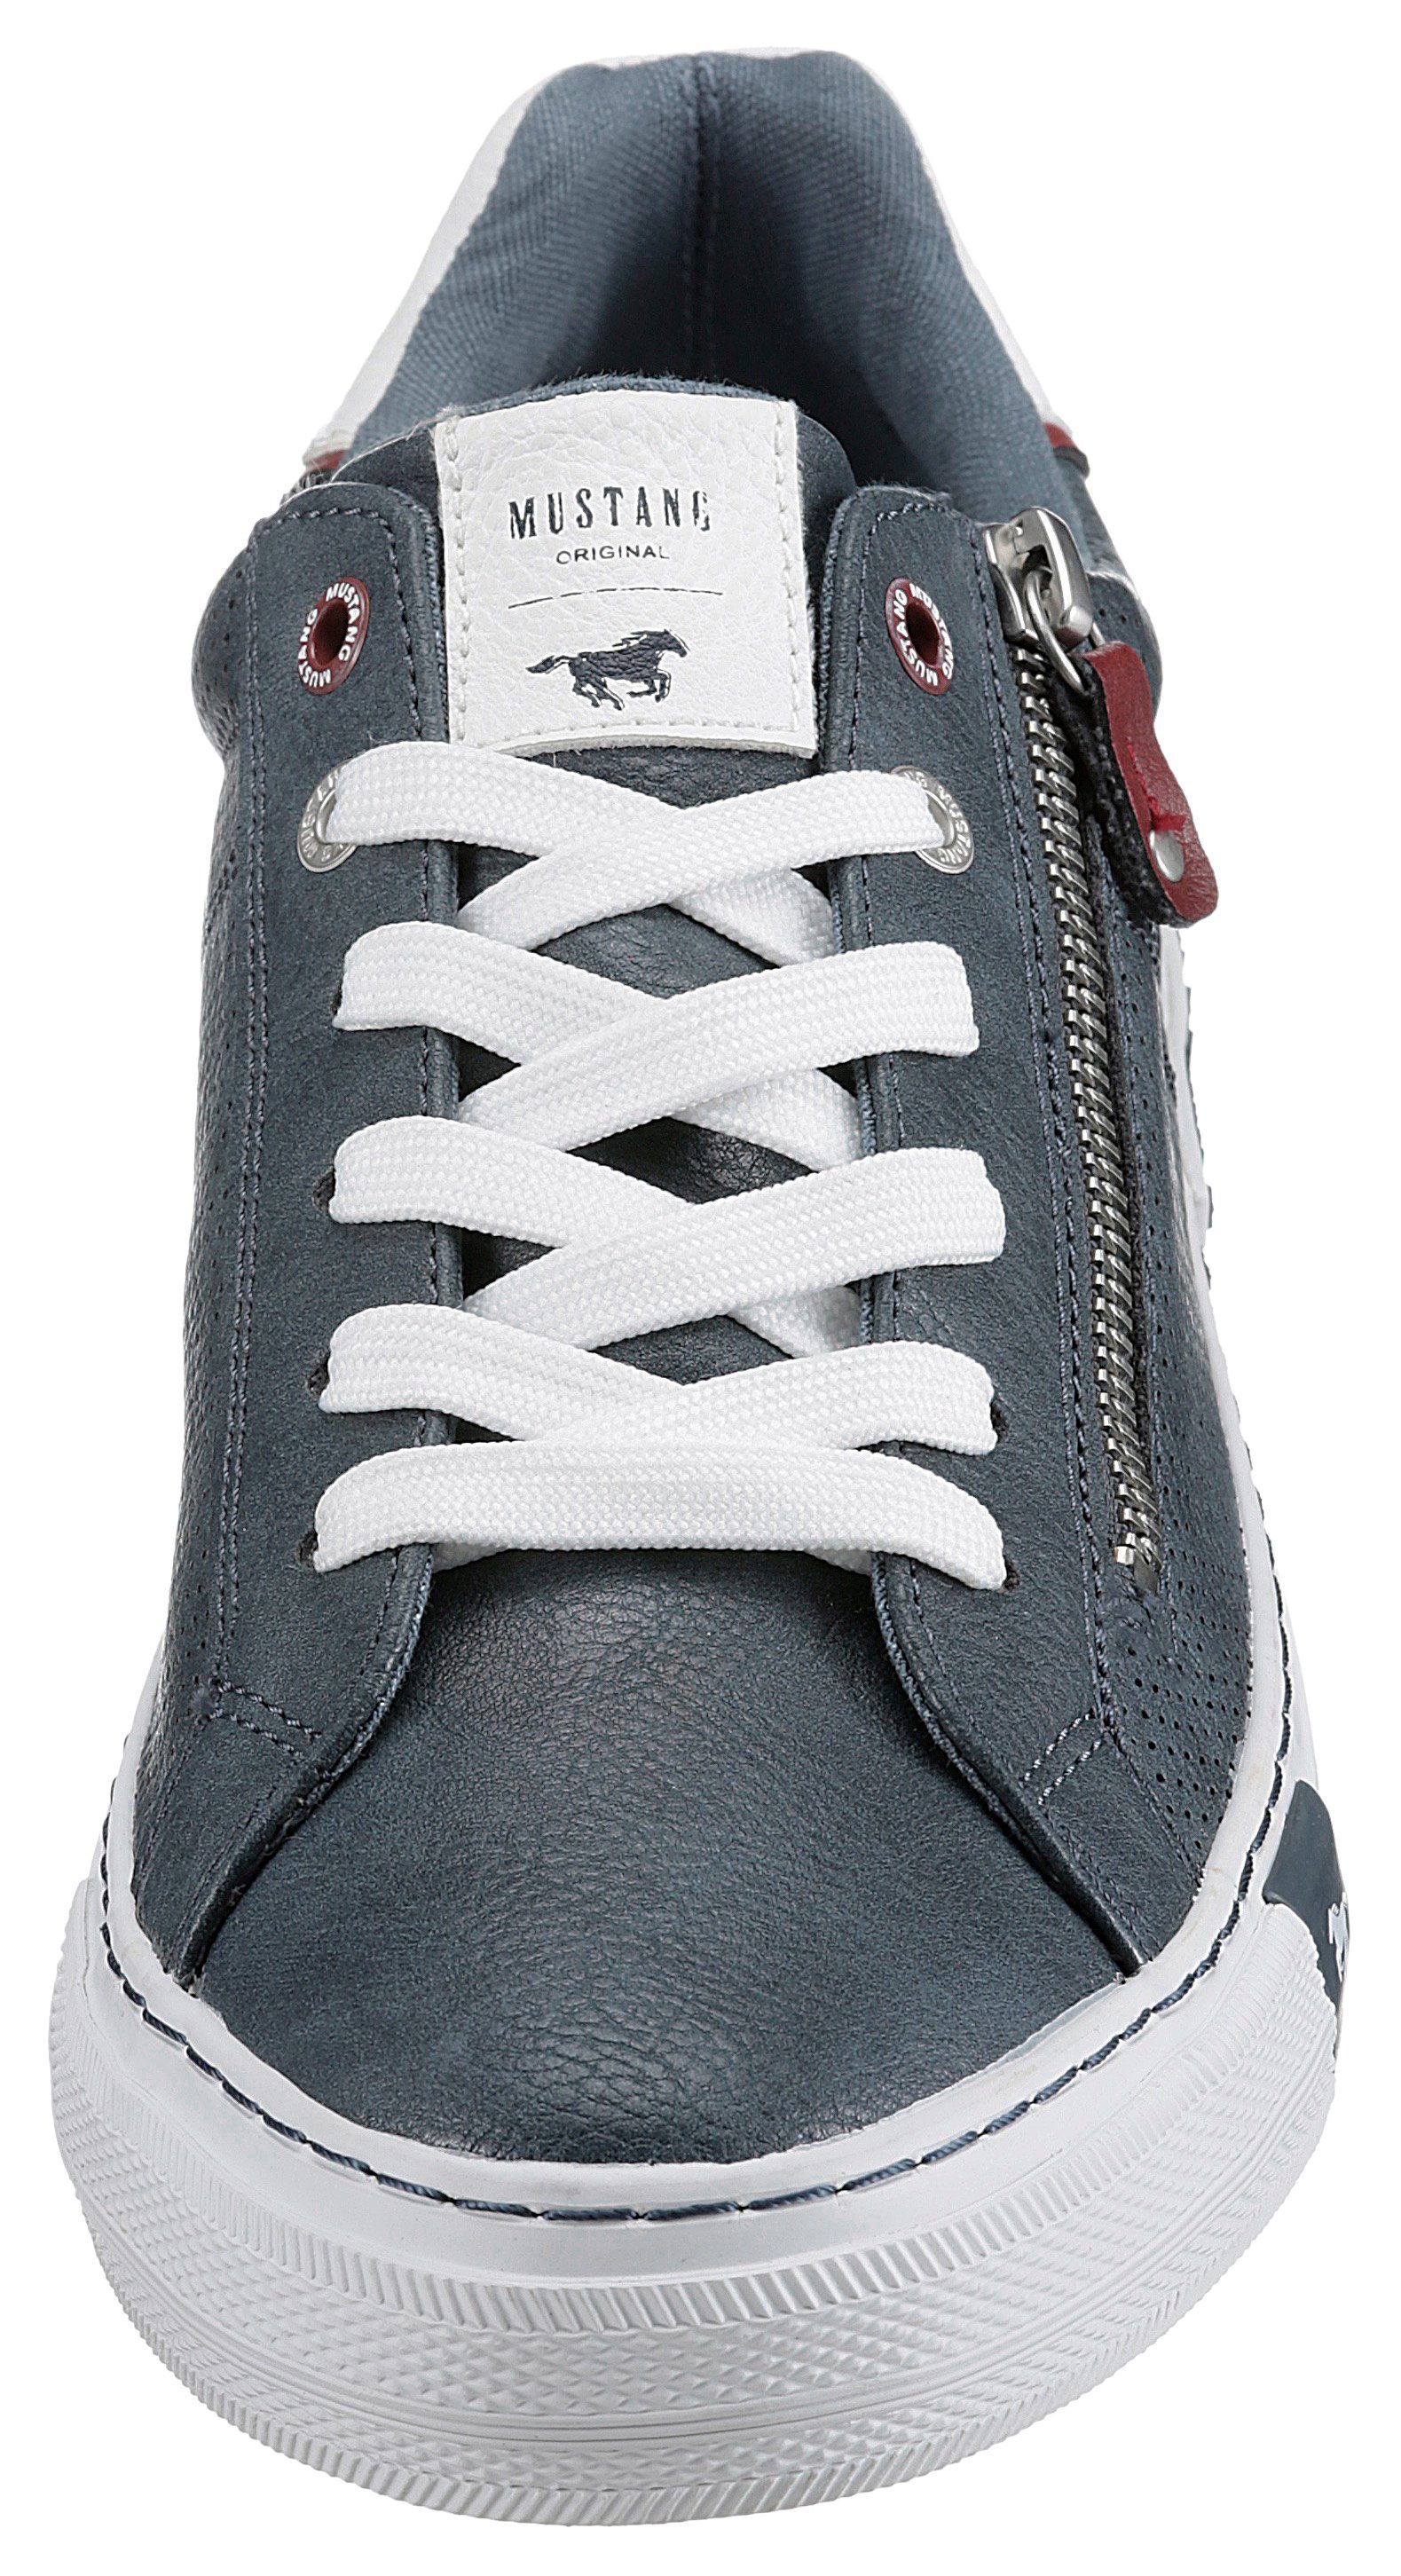 Perforation Shoes jeansblau Sneaker Mustang mit